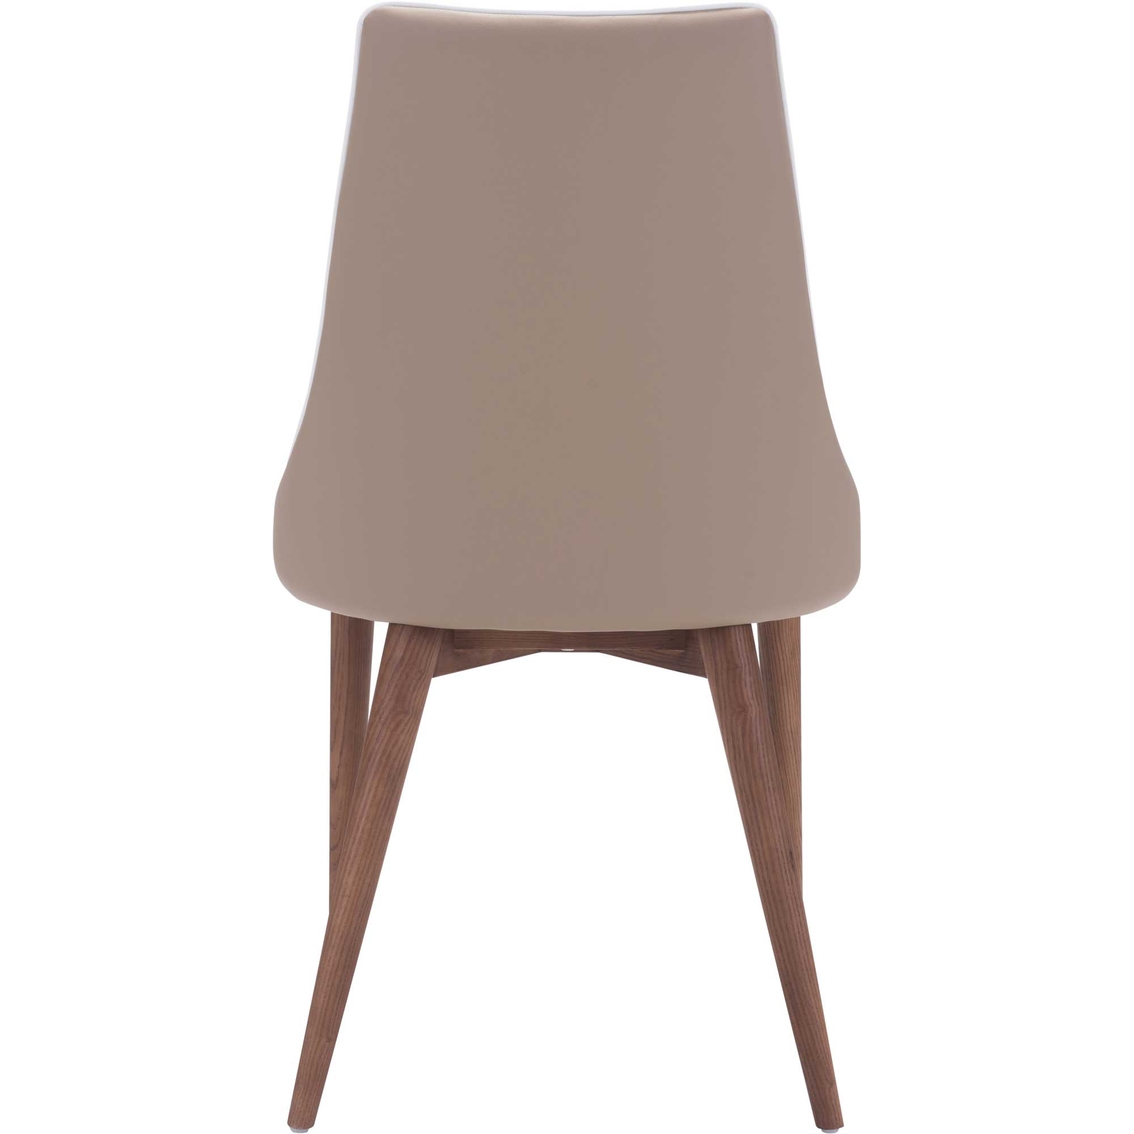 Zuo Modern Moor Dining Chair 2 Pk. - Image 4 of 8